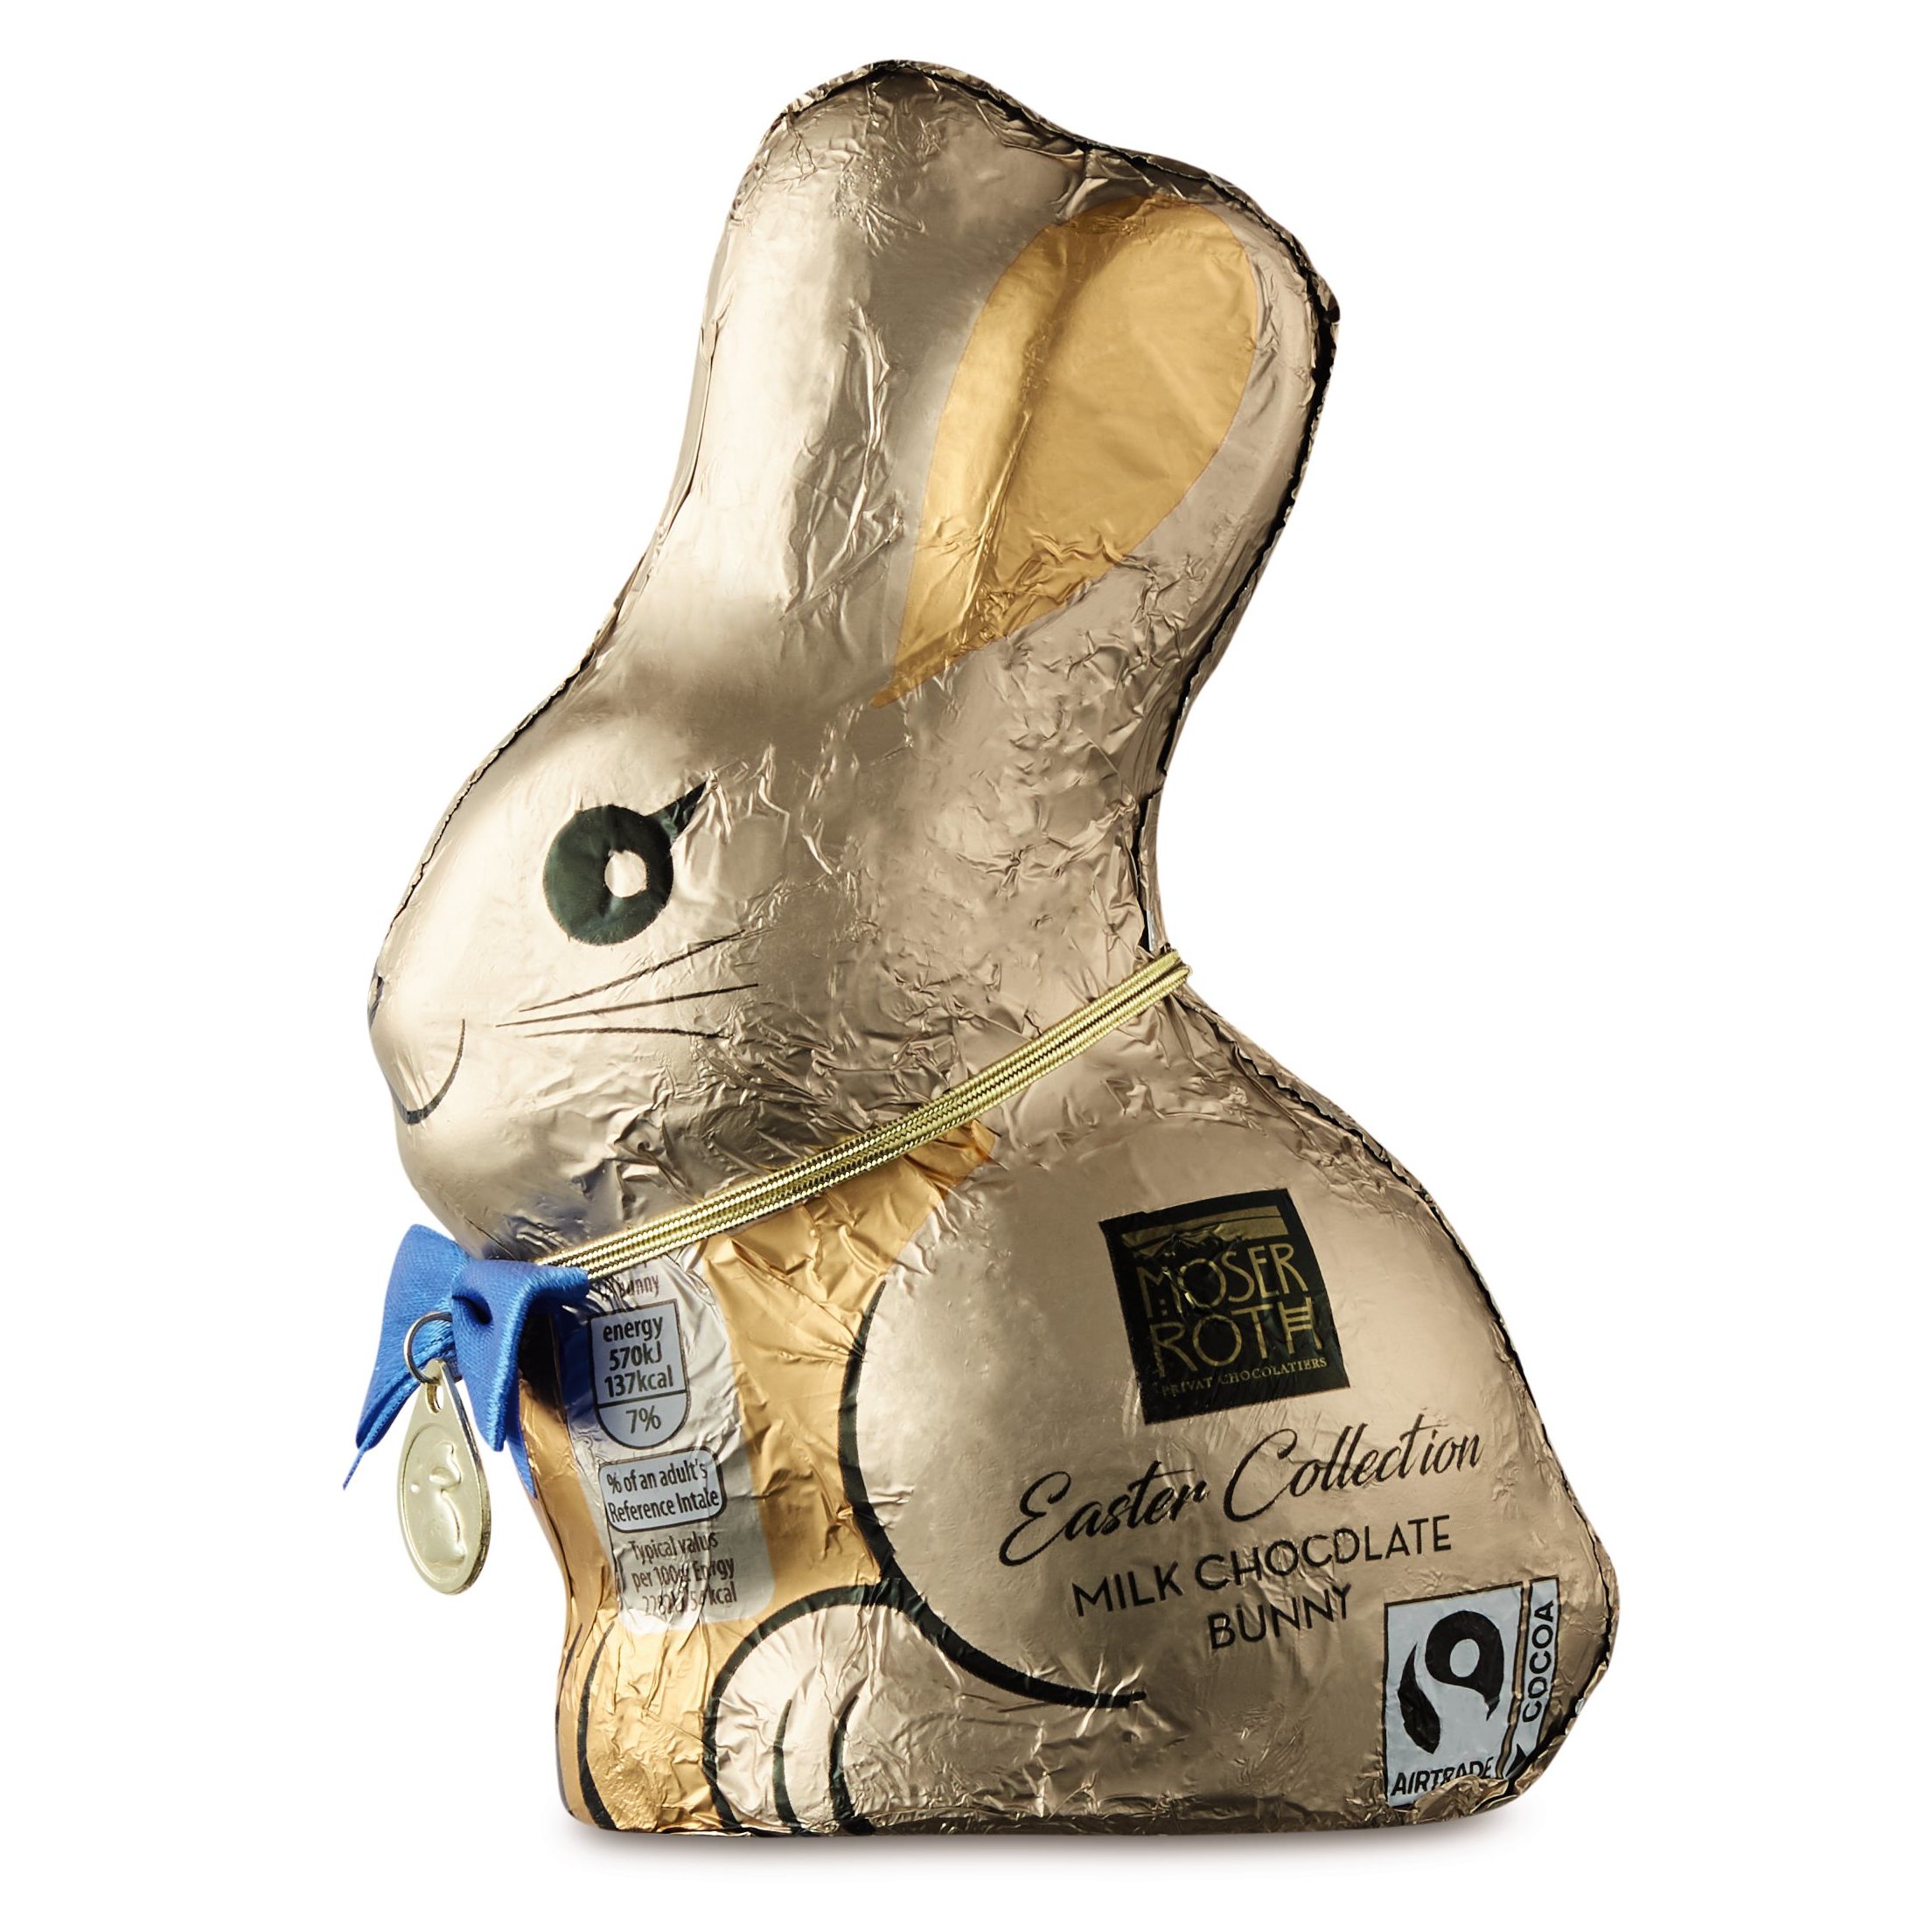 Chocolate bunny wrapped in gold foil and finished with a blue bow ribbon around its neck.